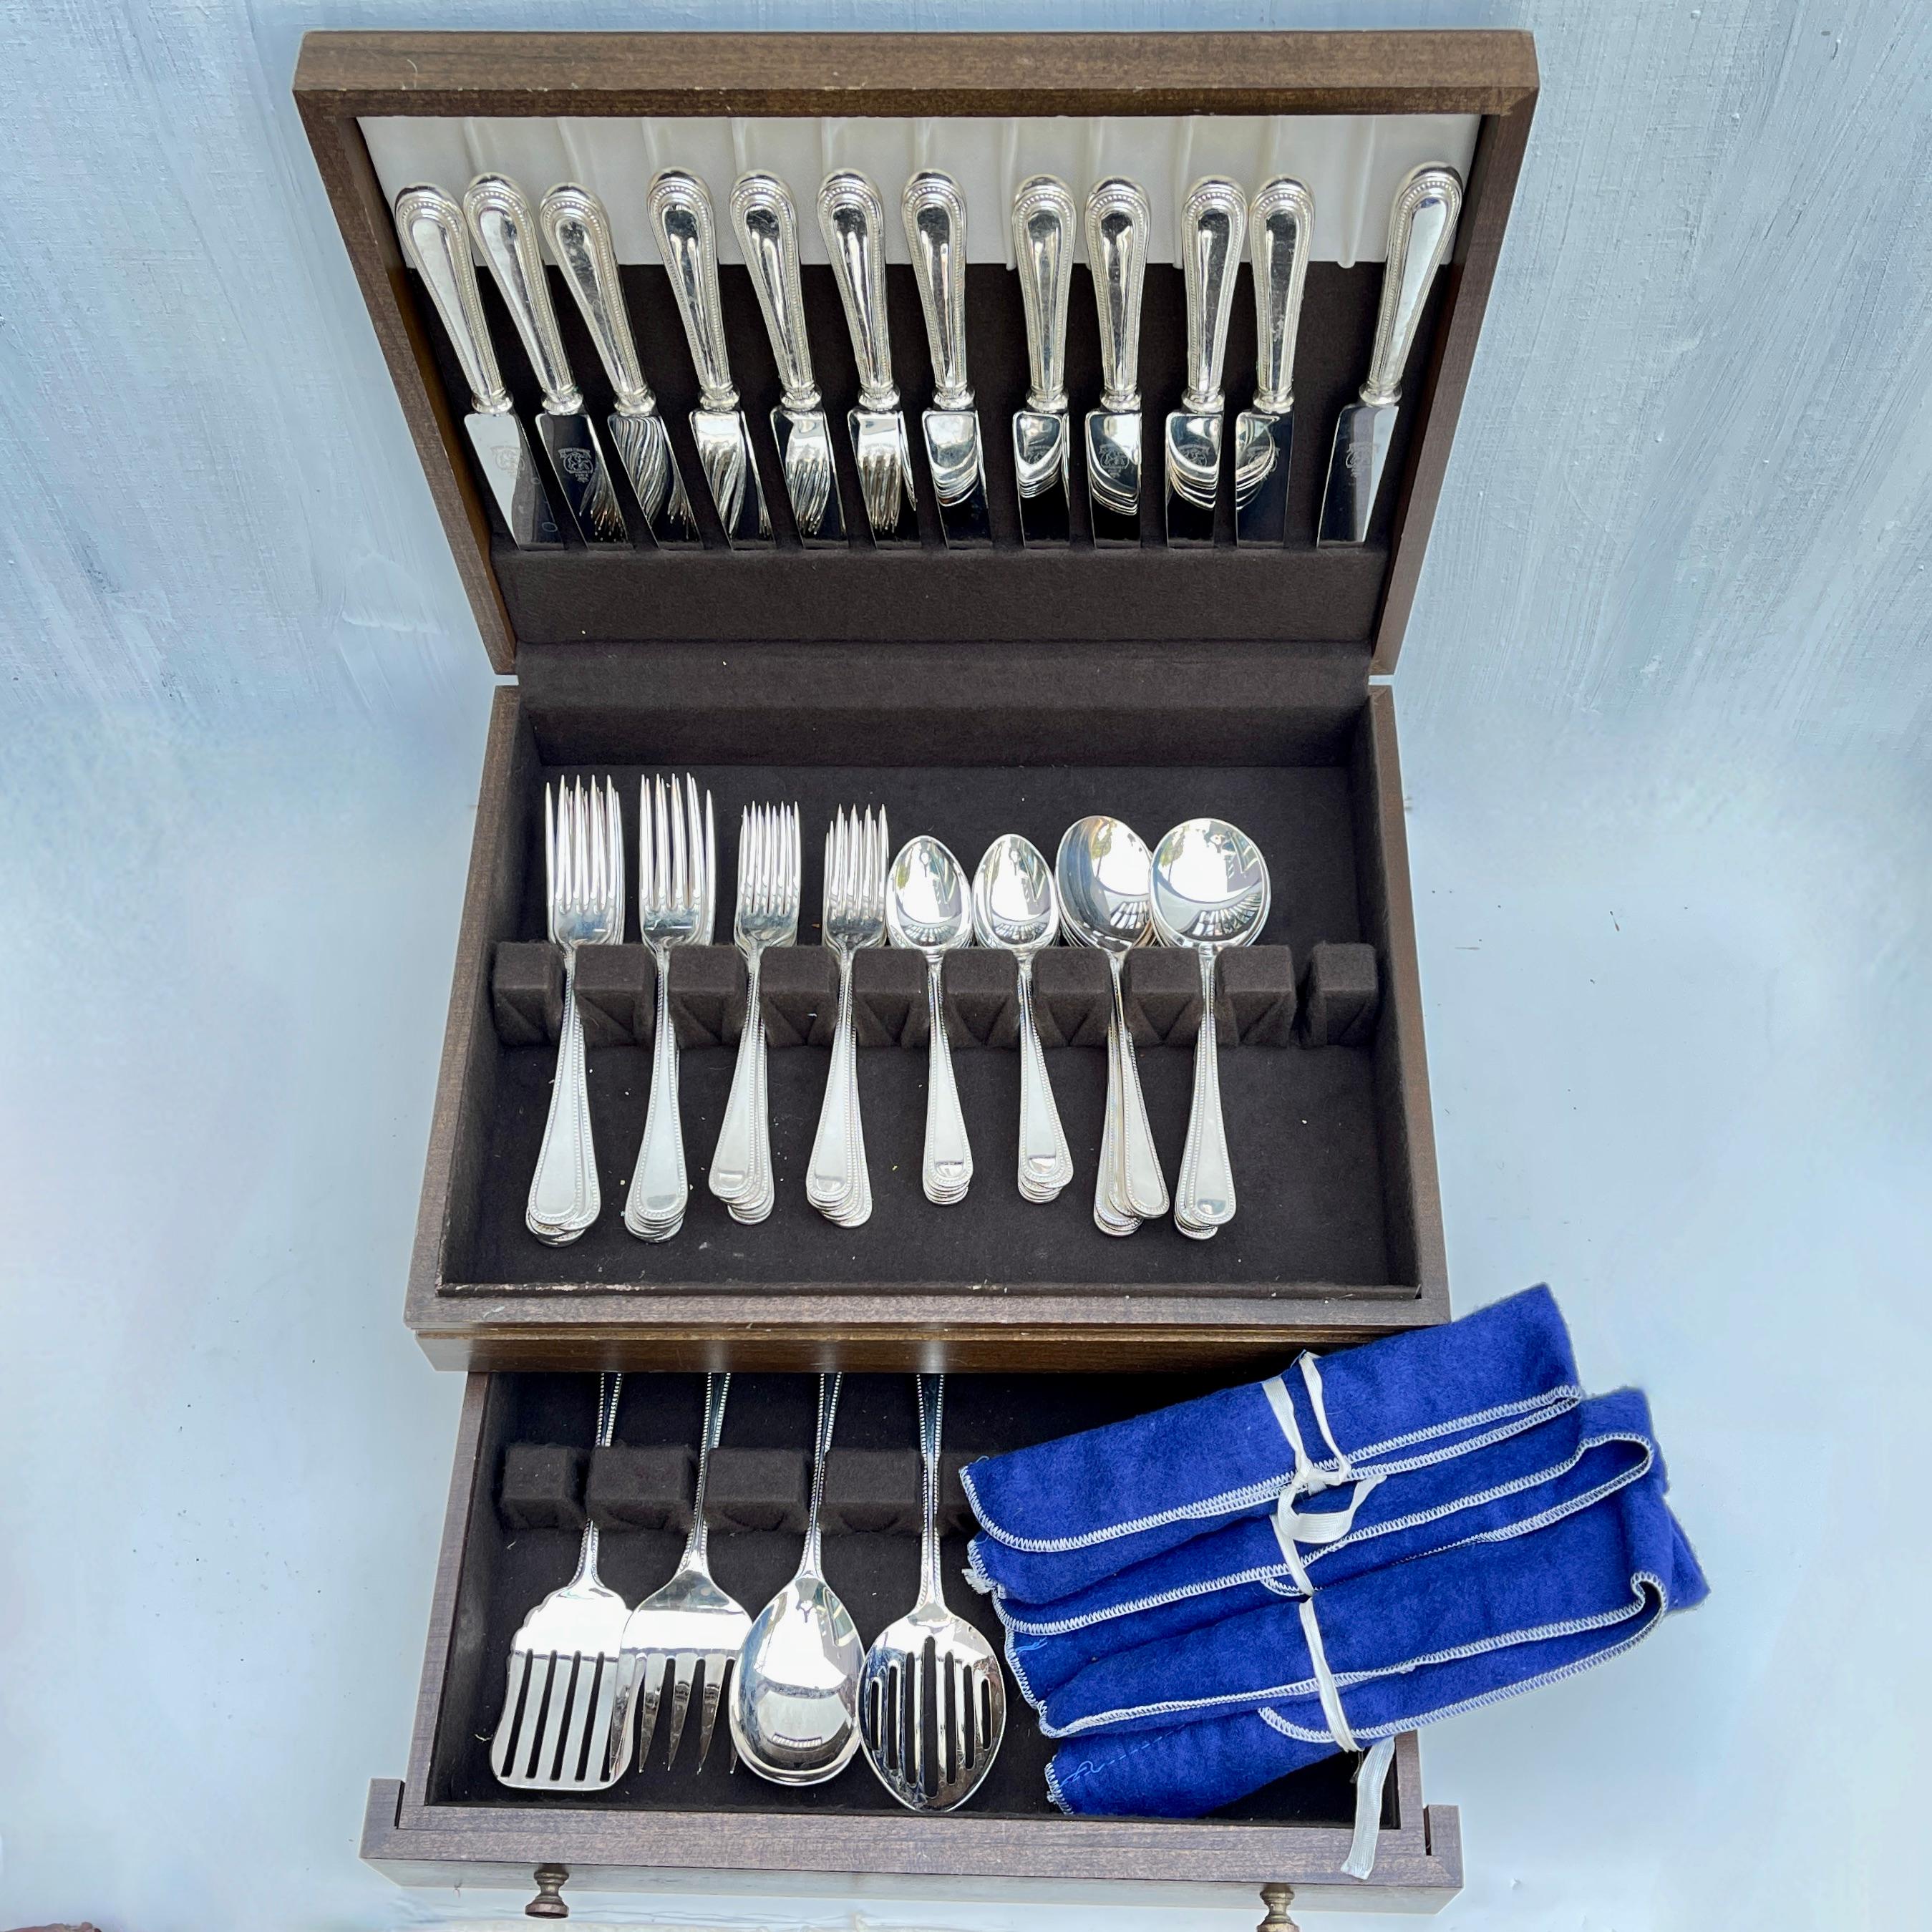 A 76 Piece Boxed set of EPNS, silver plated flatware in the Bead pattern, Kirk & Matz, Sheffield, England – circa 1960s.

Kirk & Matz Ltd. was an American cutlery importer with Sheffield links. Boxed sets of high quality, plated cutlery were a